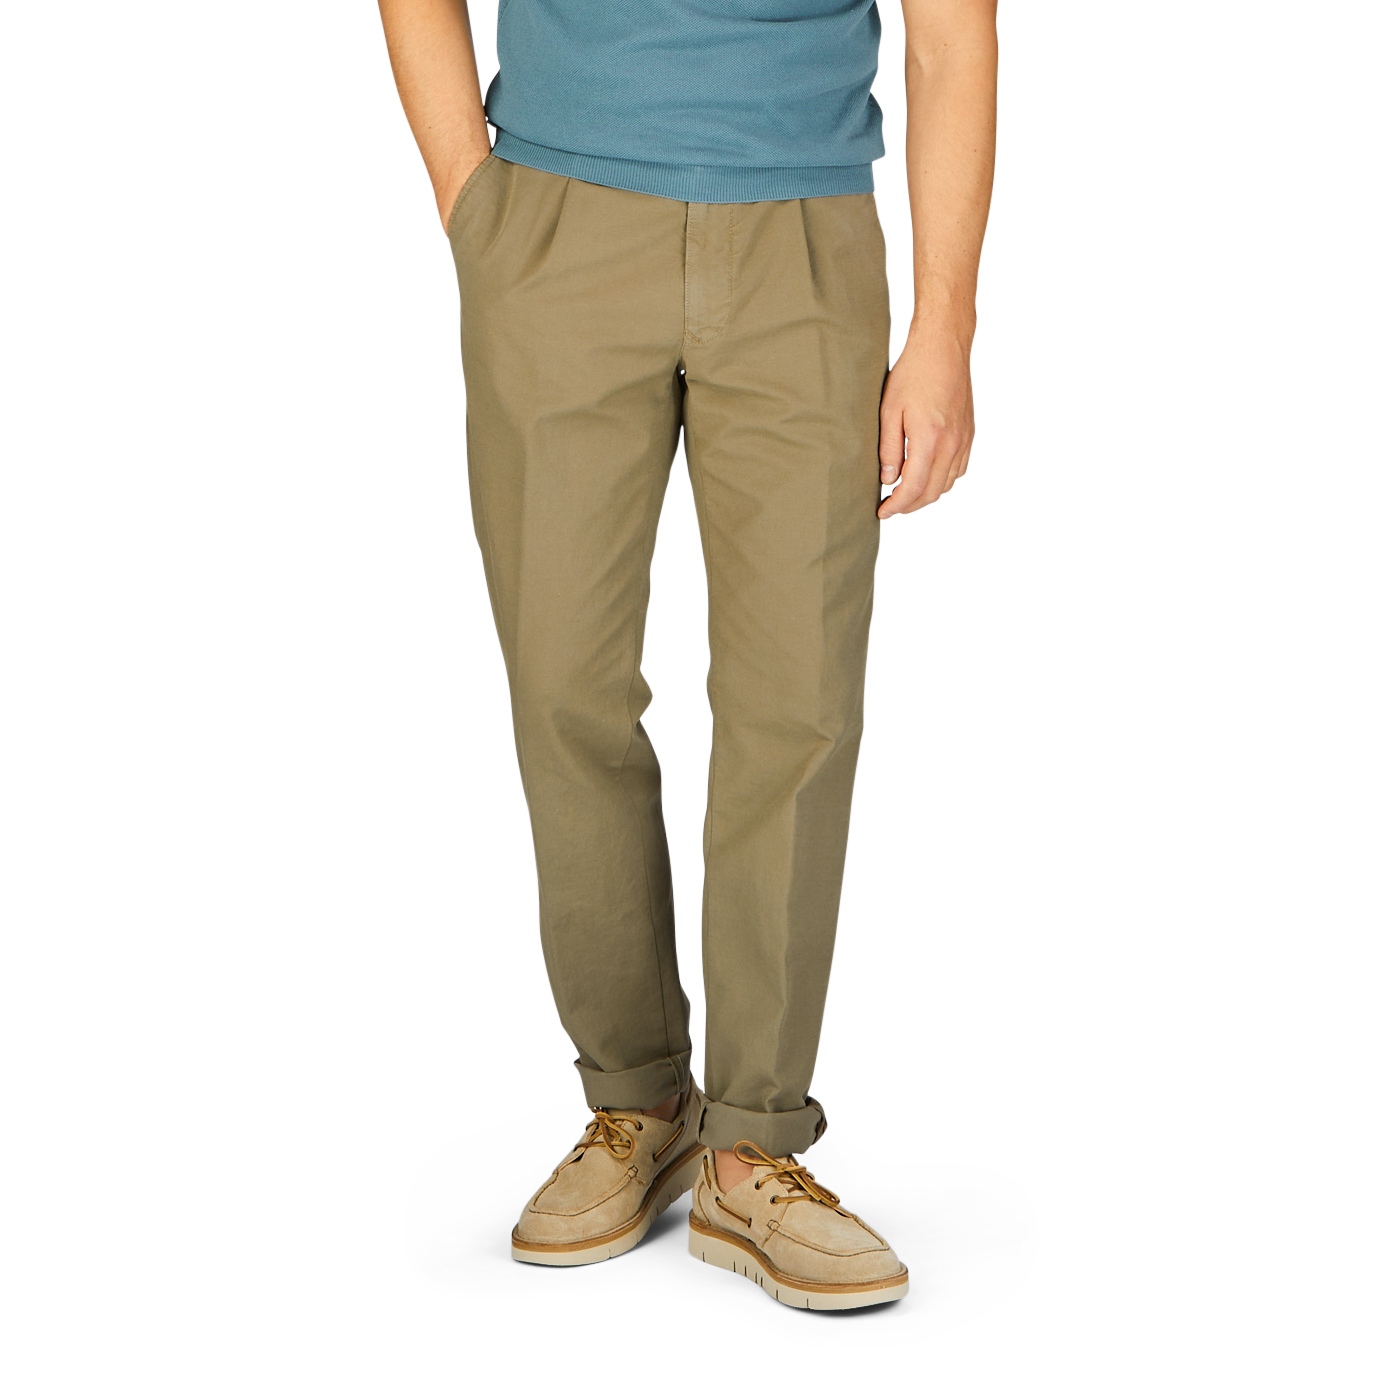 Man wearing Grass Green Cotton Stretch Pleated Chinos from Incotex and beige shoes.